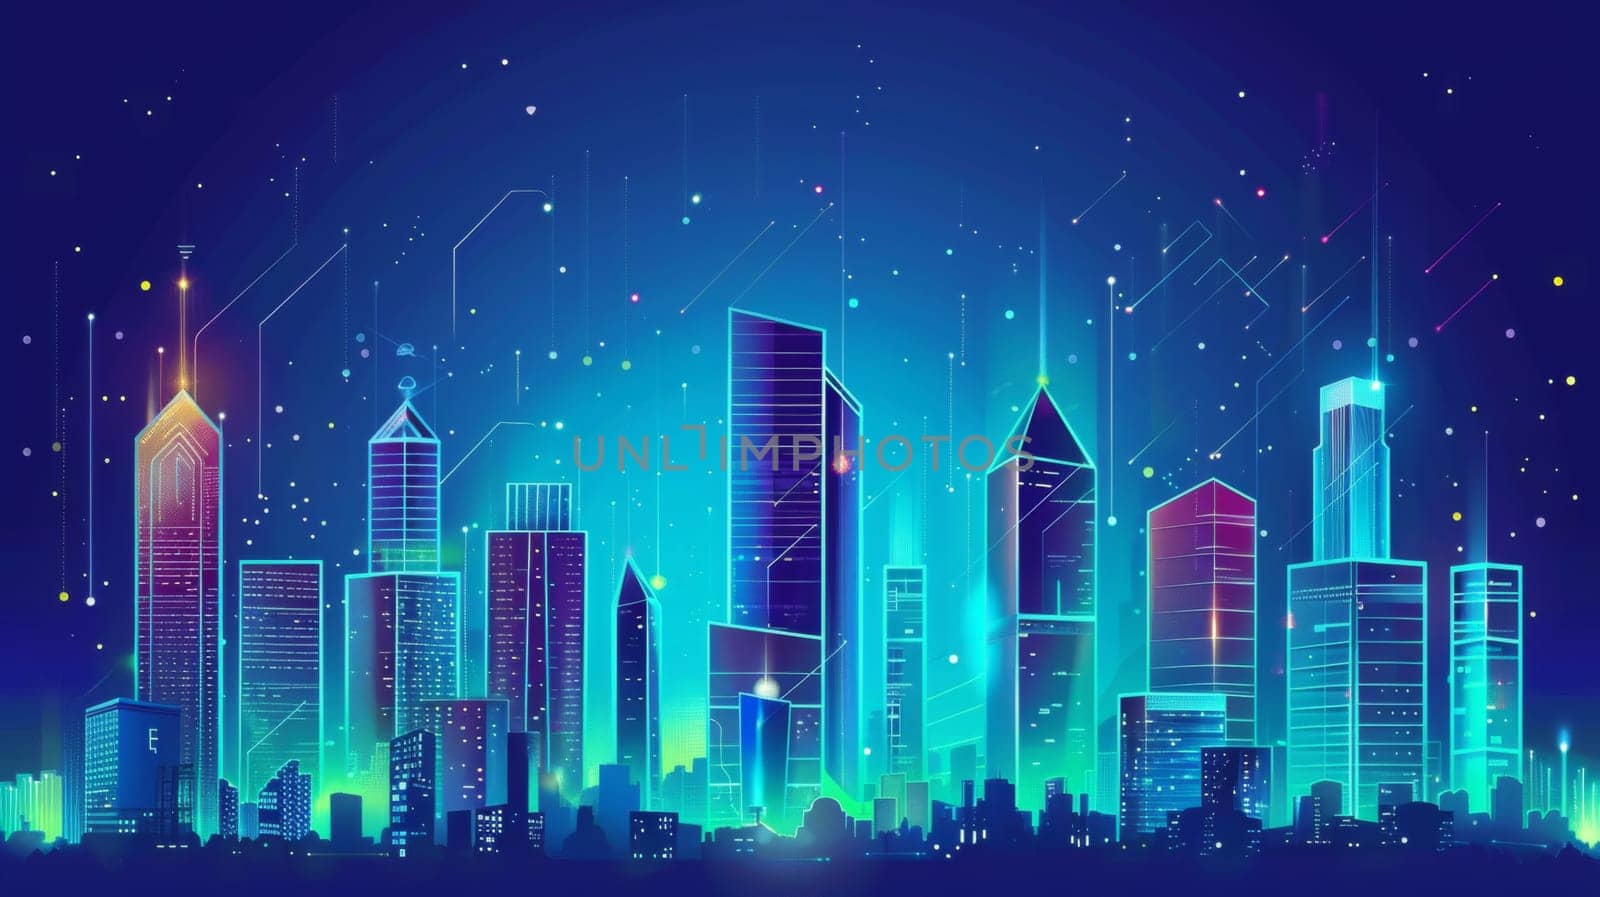 Abstract smart city concept blue background illustration by papatonic